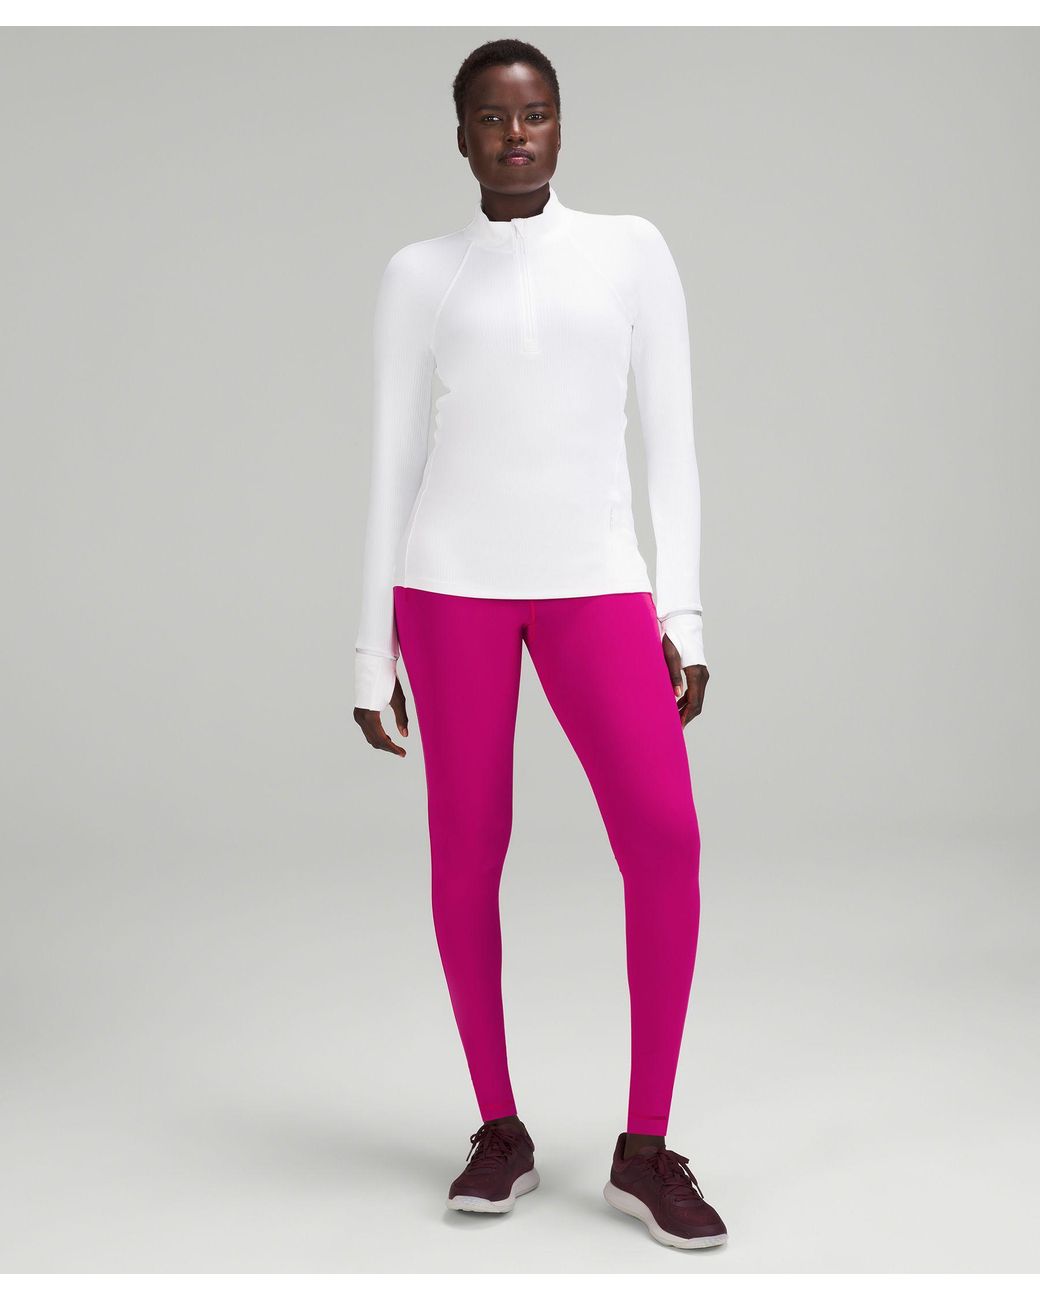 Speed Wunder high beam reflective leggings and Cosmic Pink Neck Energy Bra  - SoulCycle haul too small :( : r/lululemon